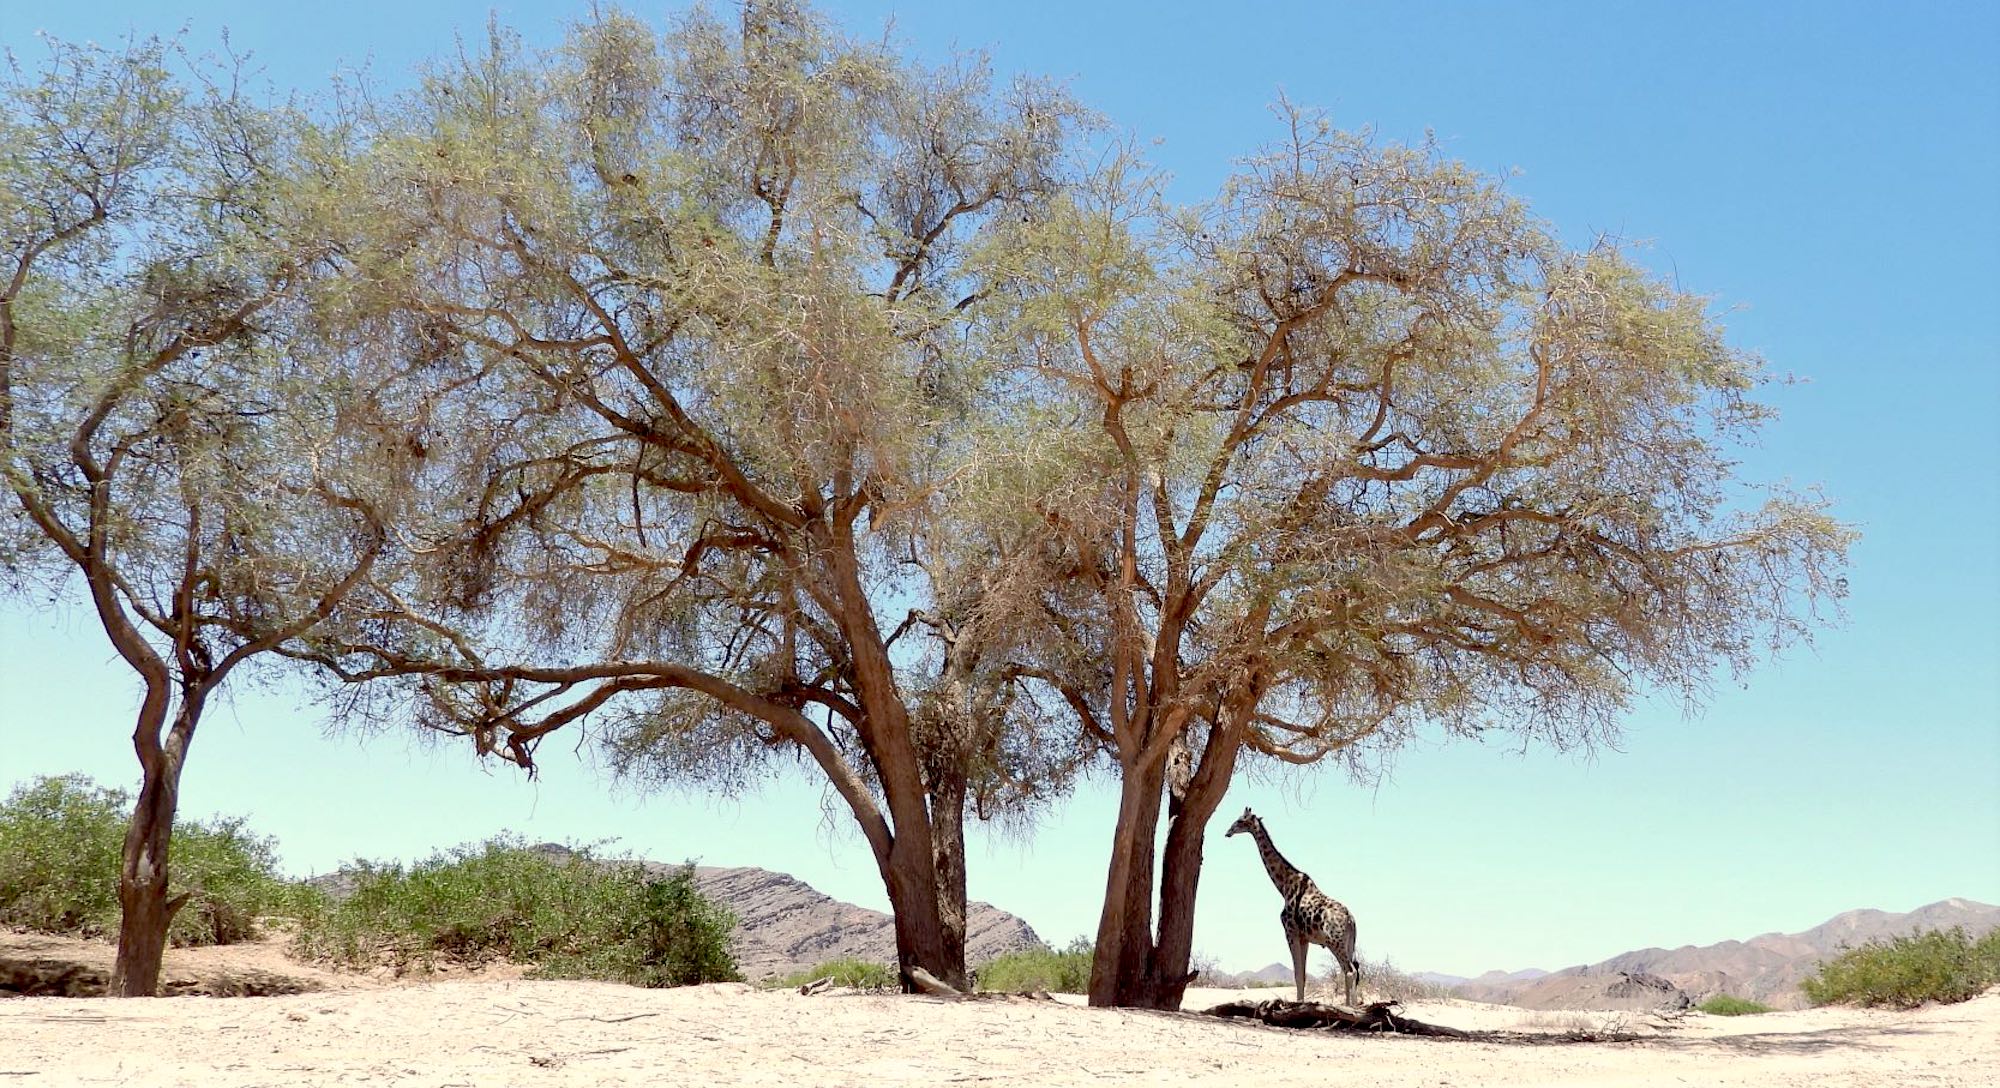 A lone giraffe stands under a massive Ana tree in a dry riverbed.